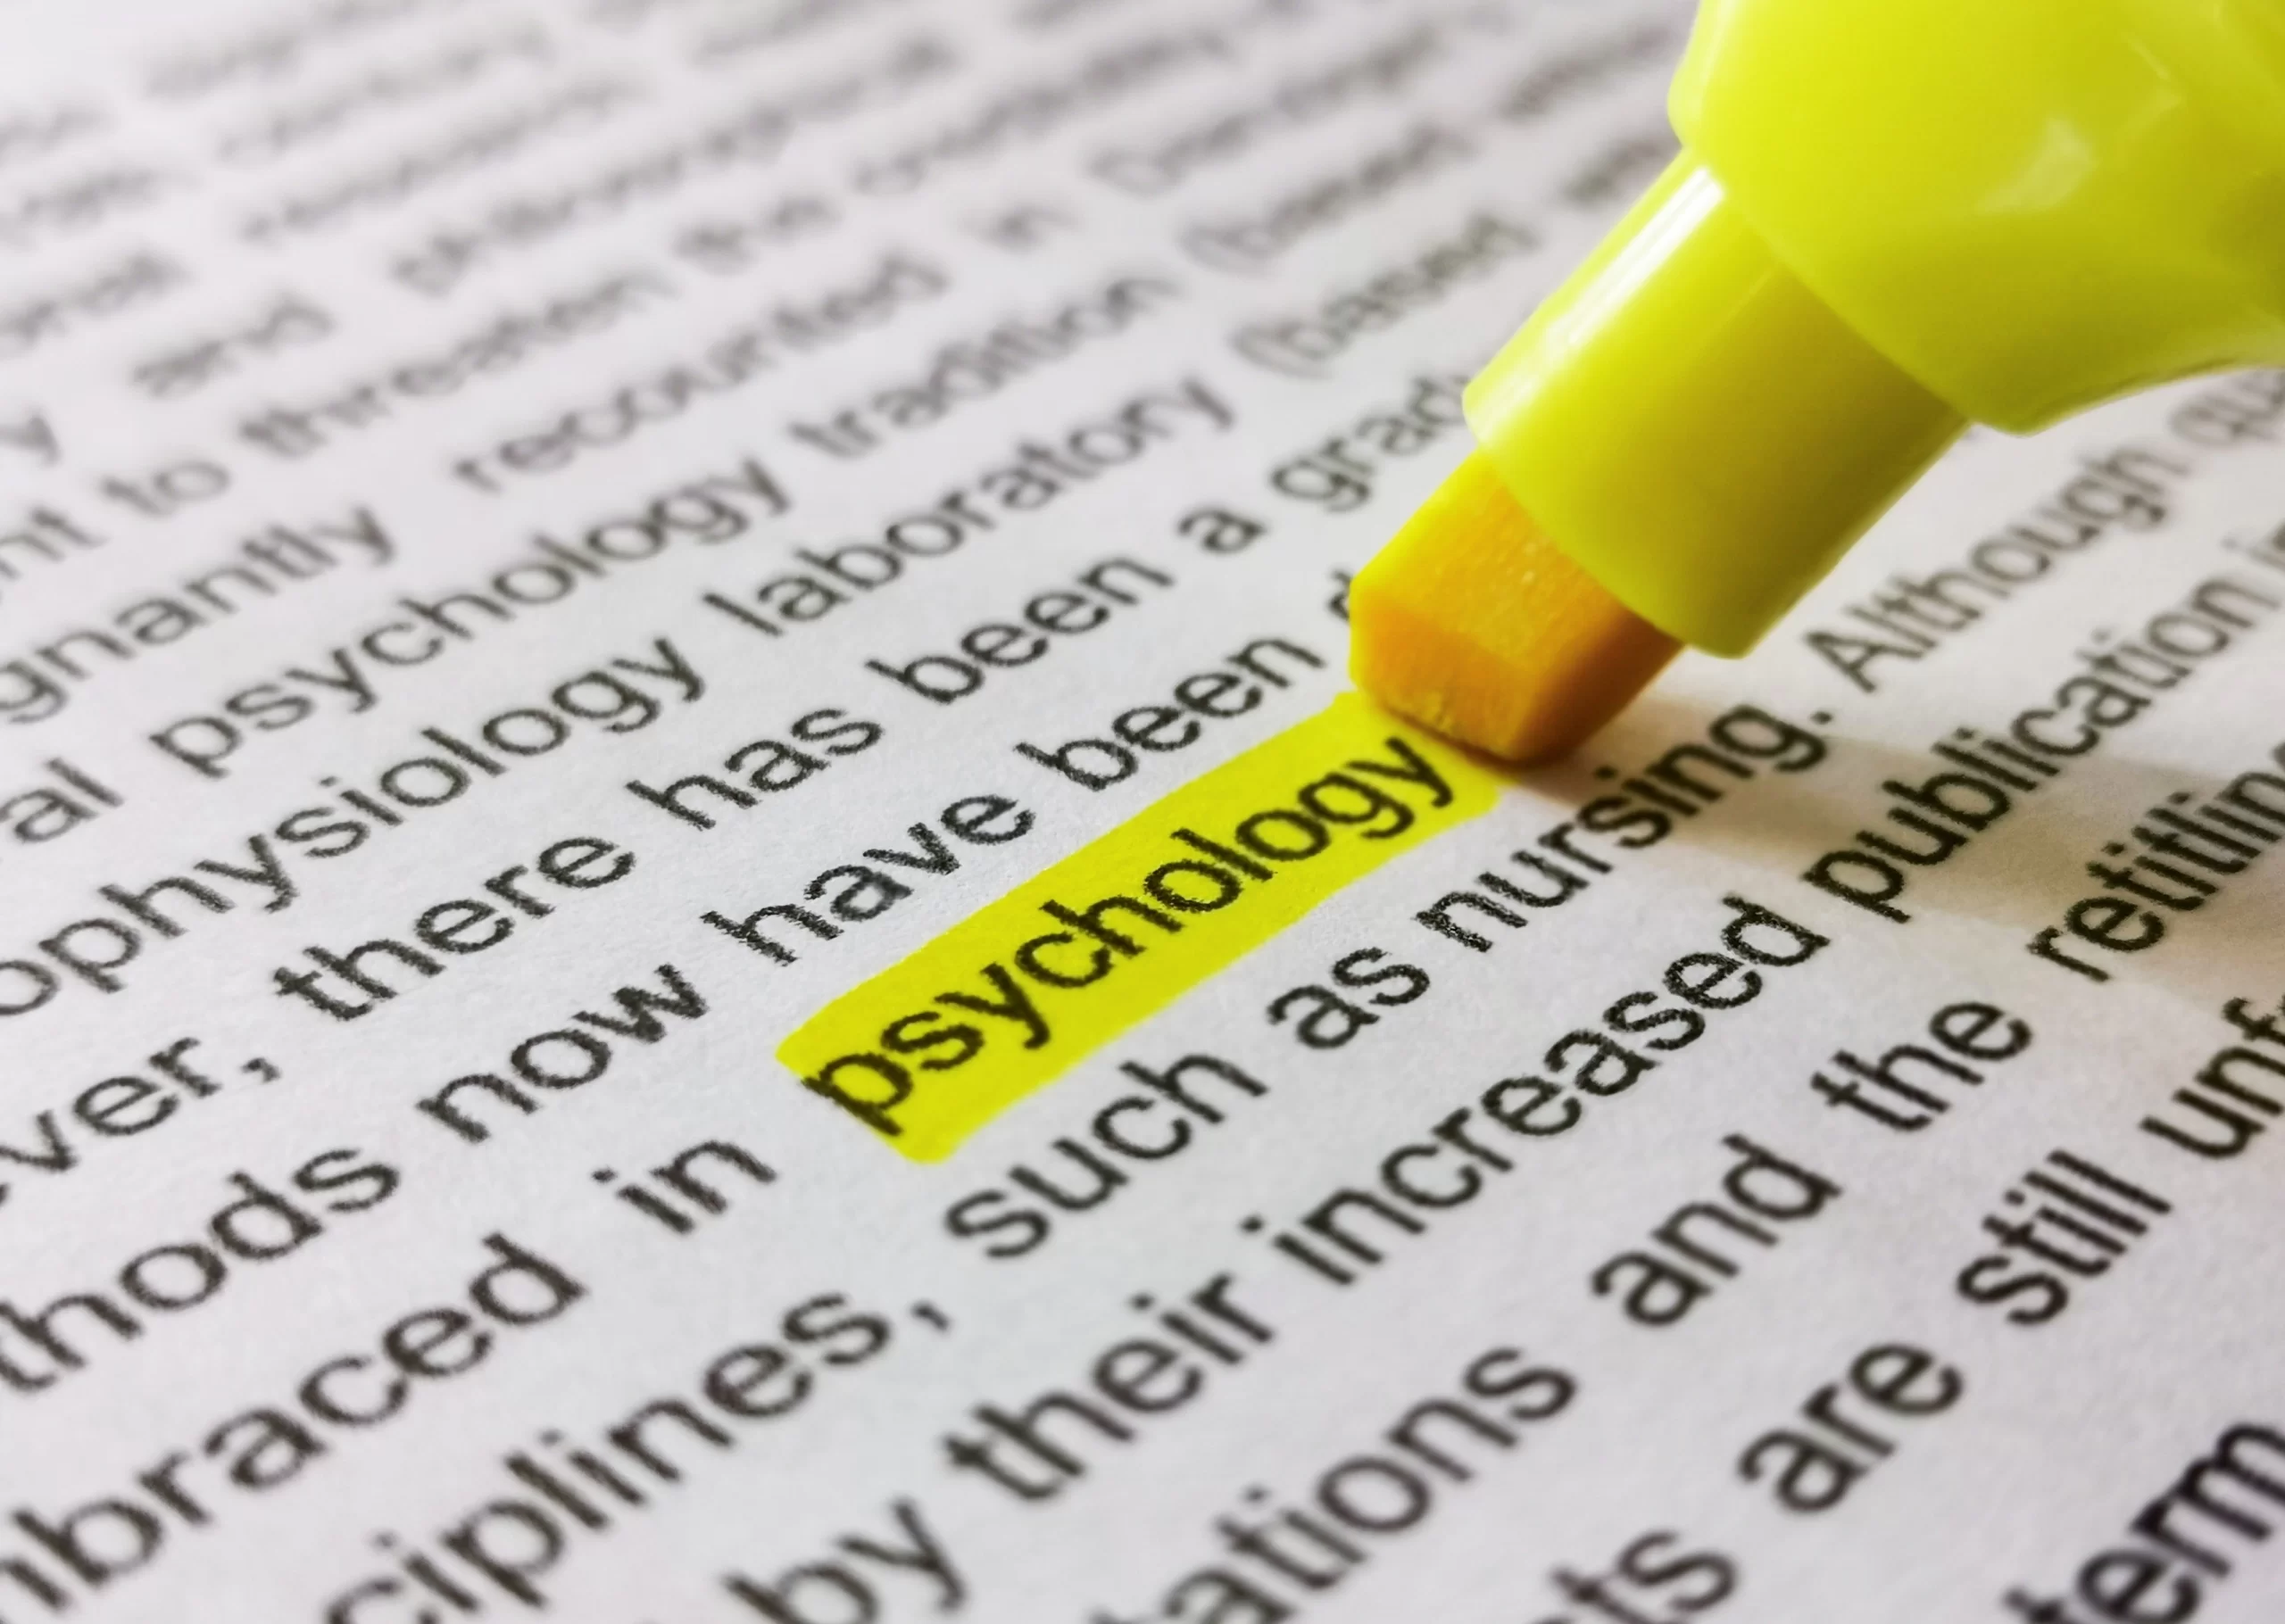 Close up image of marker highlighting word psychol nddnkxl scaled. Jpg